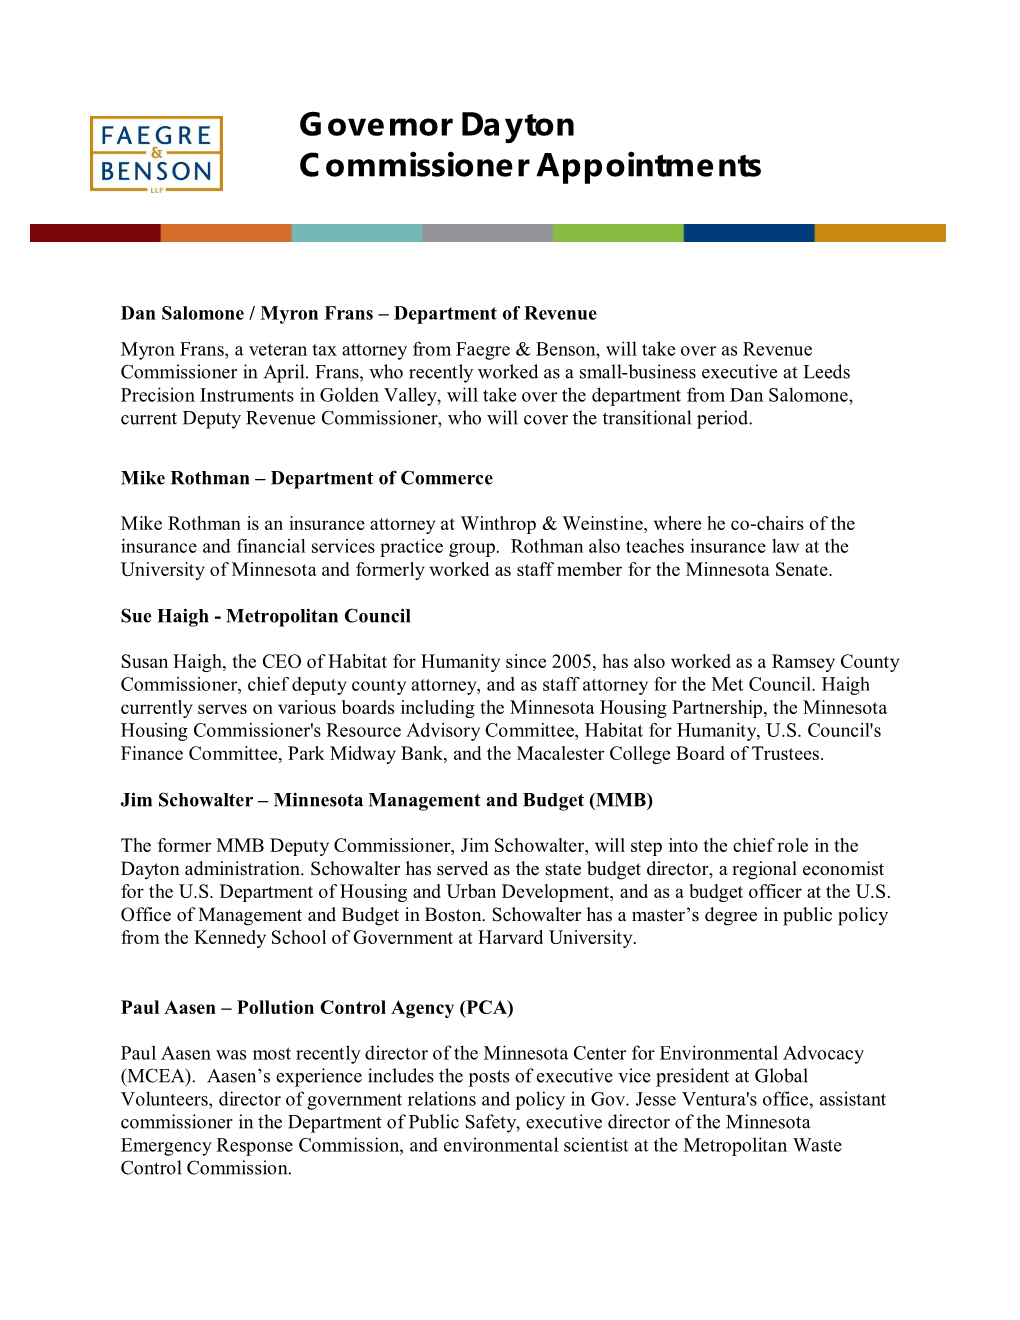 Governor Dayton Commissioner Appointments